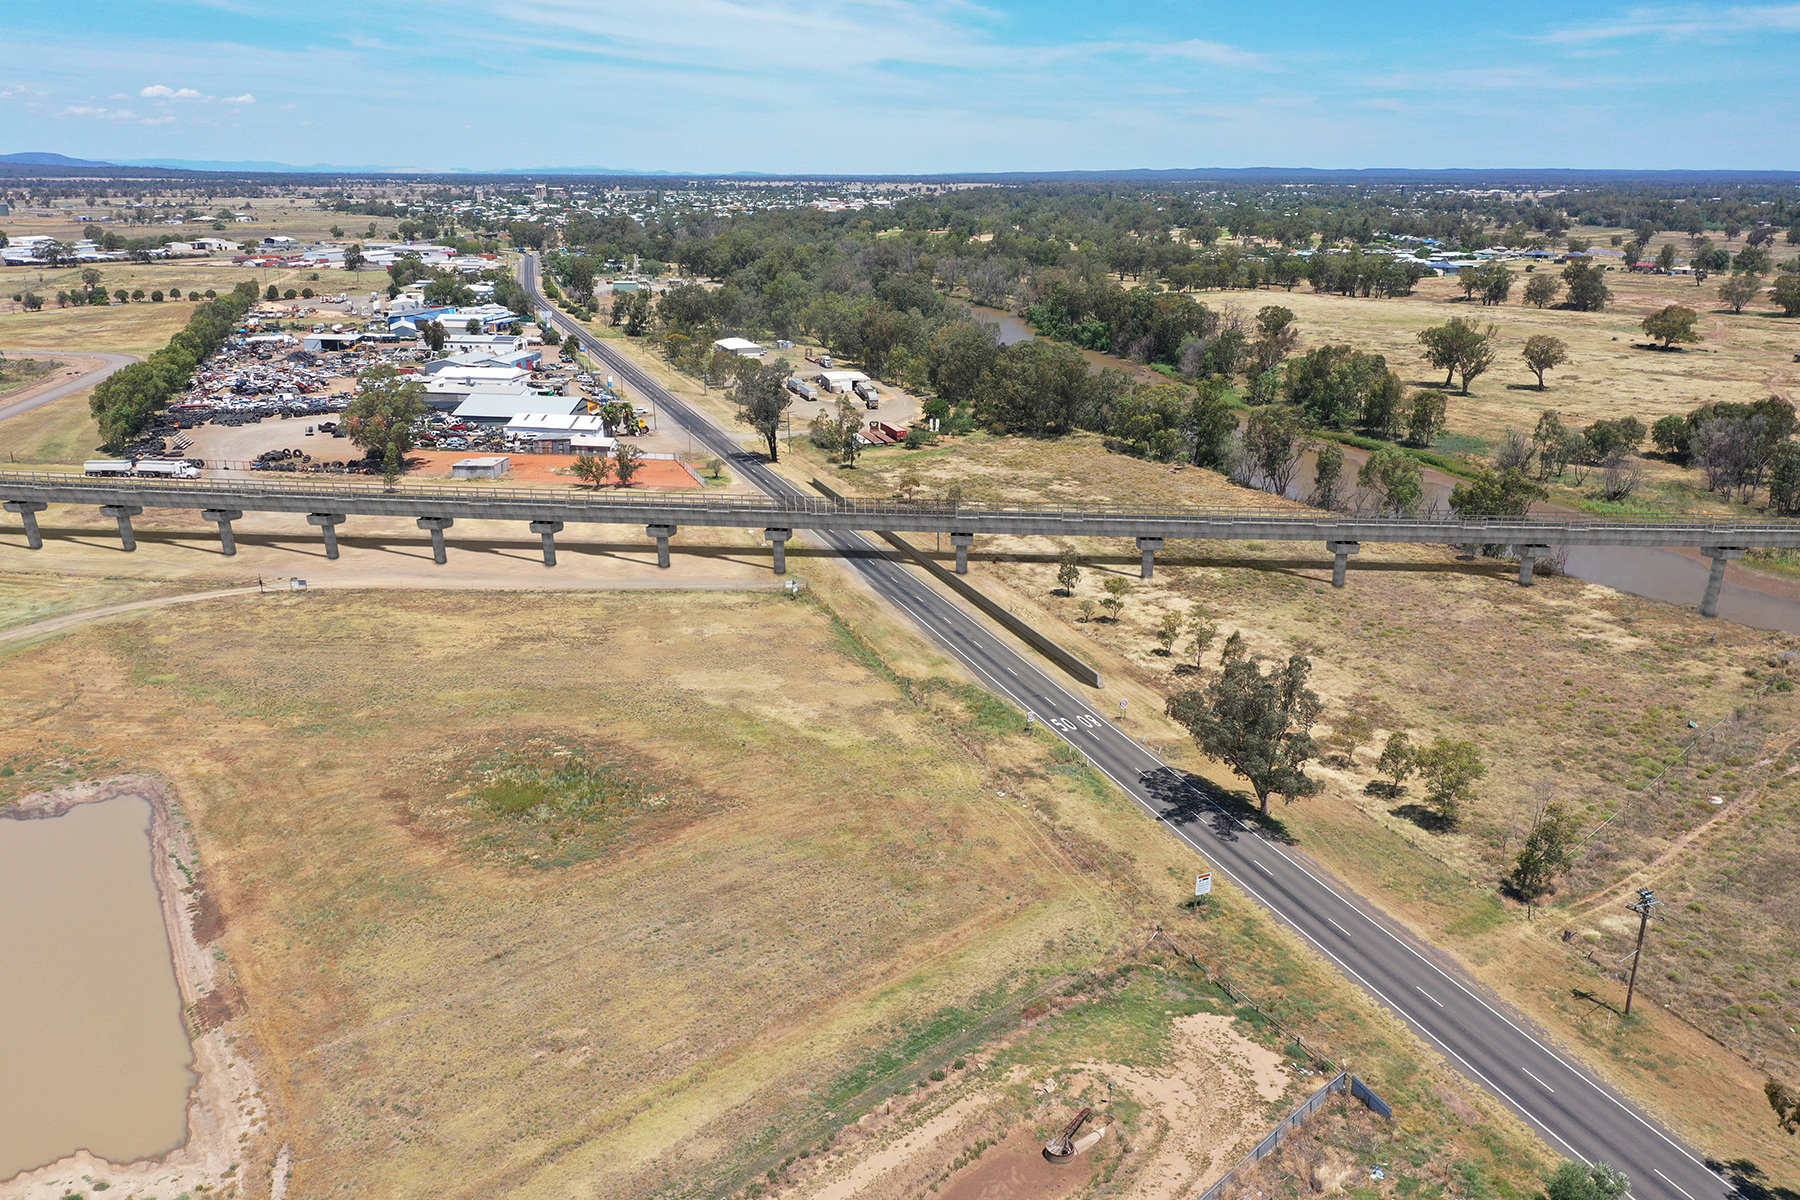 Illustration of a view looking South East over the Kamilaroi Highway, Narrabri